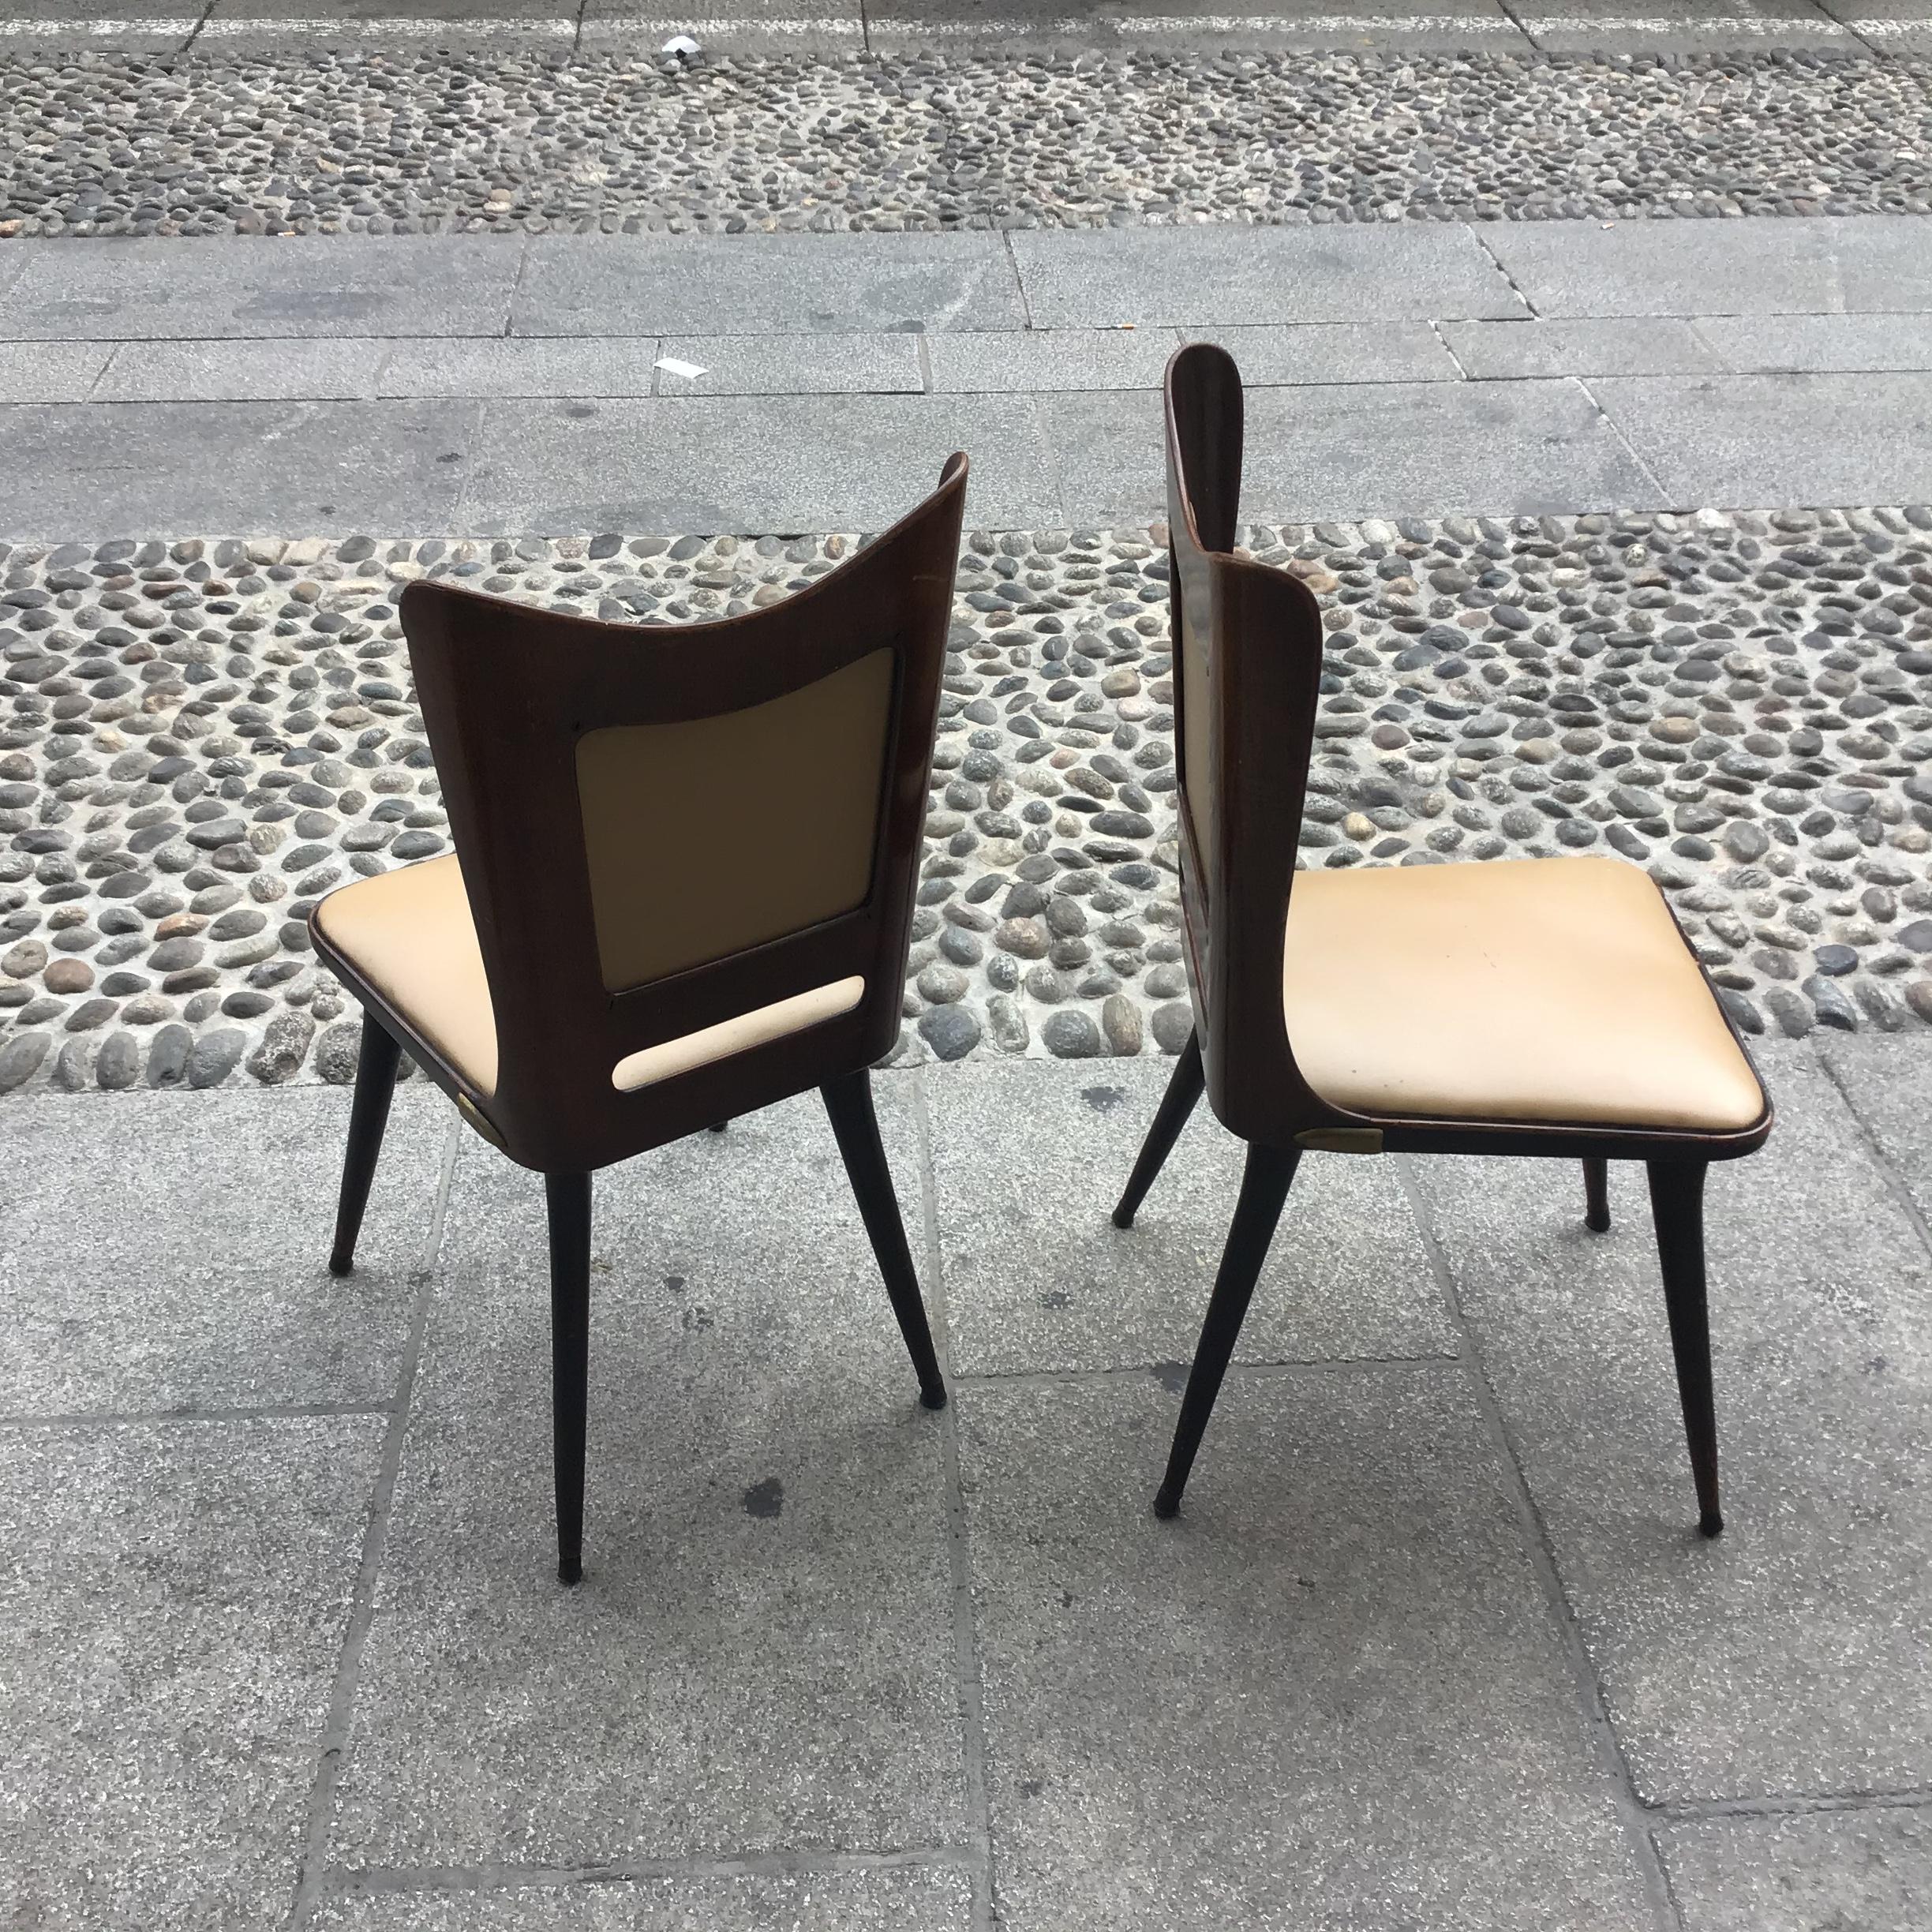 Carlo Ratti Chairs Wood Brass Skin 1955, Italy For Sale 6